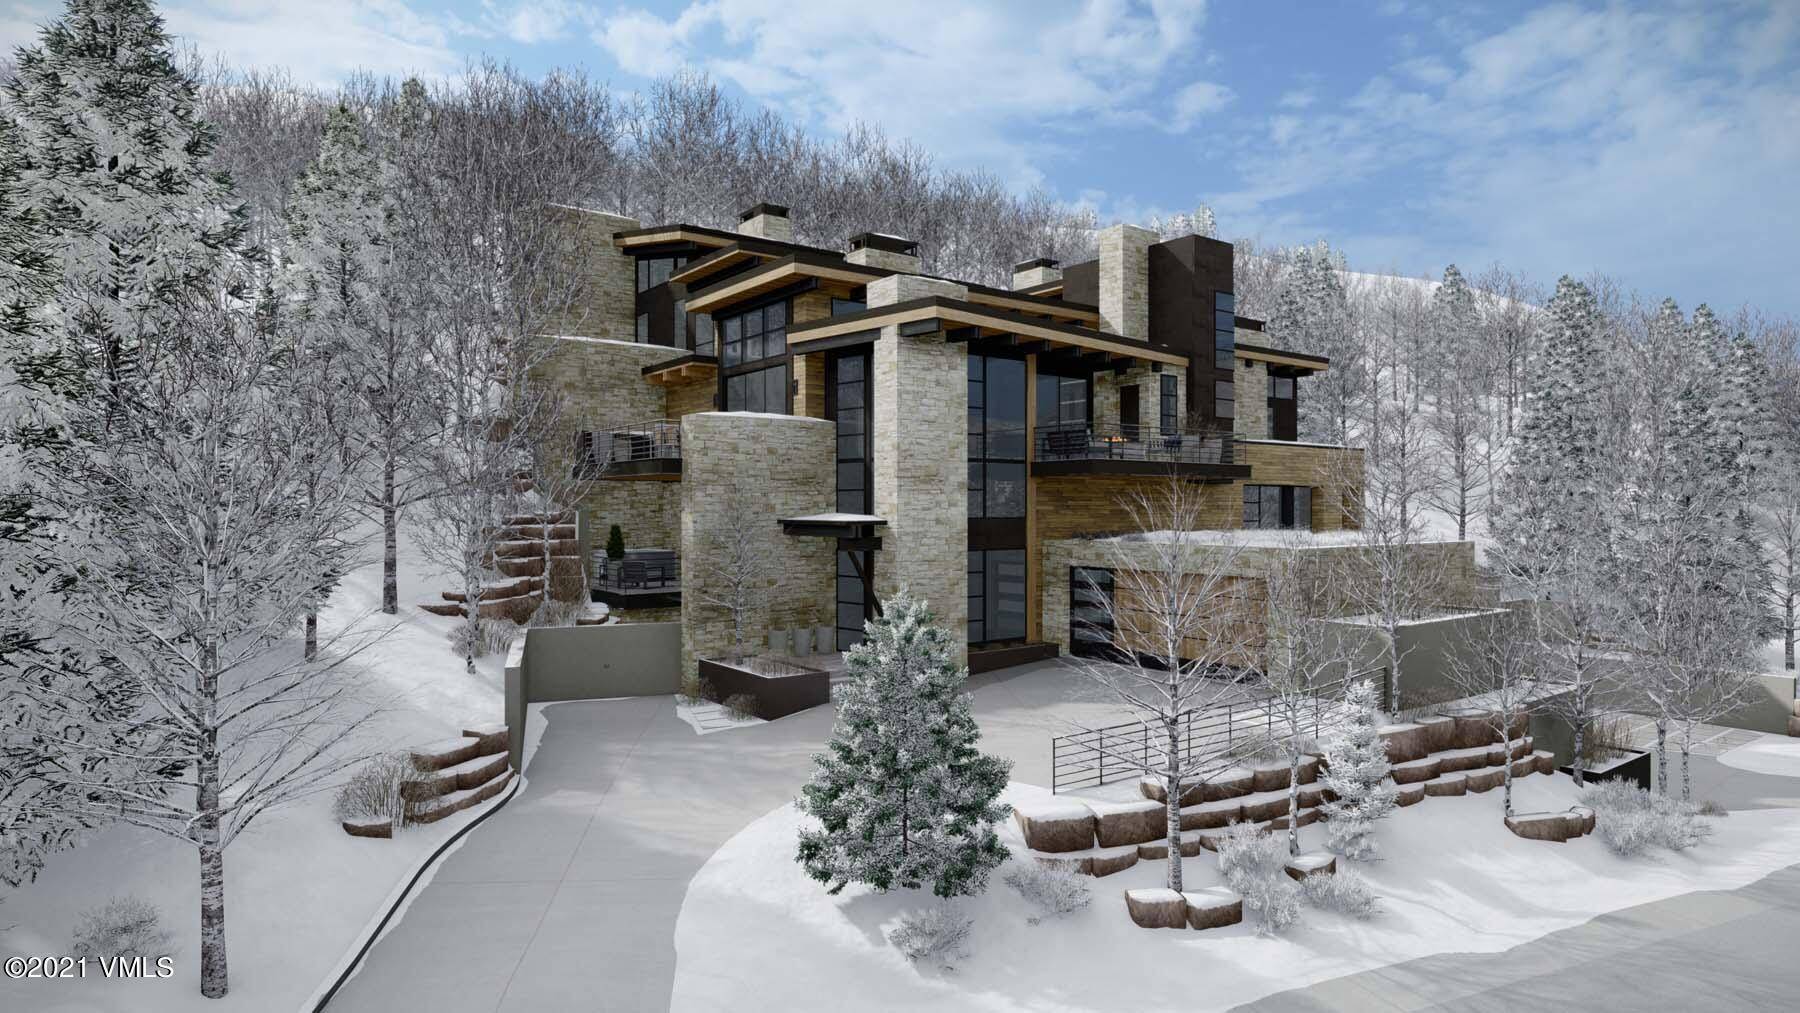 Rare opportunity to own a new construction, mountain contemporary home on the highly coveted Forest Road in Vail.